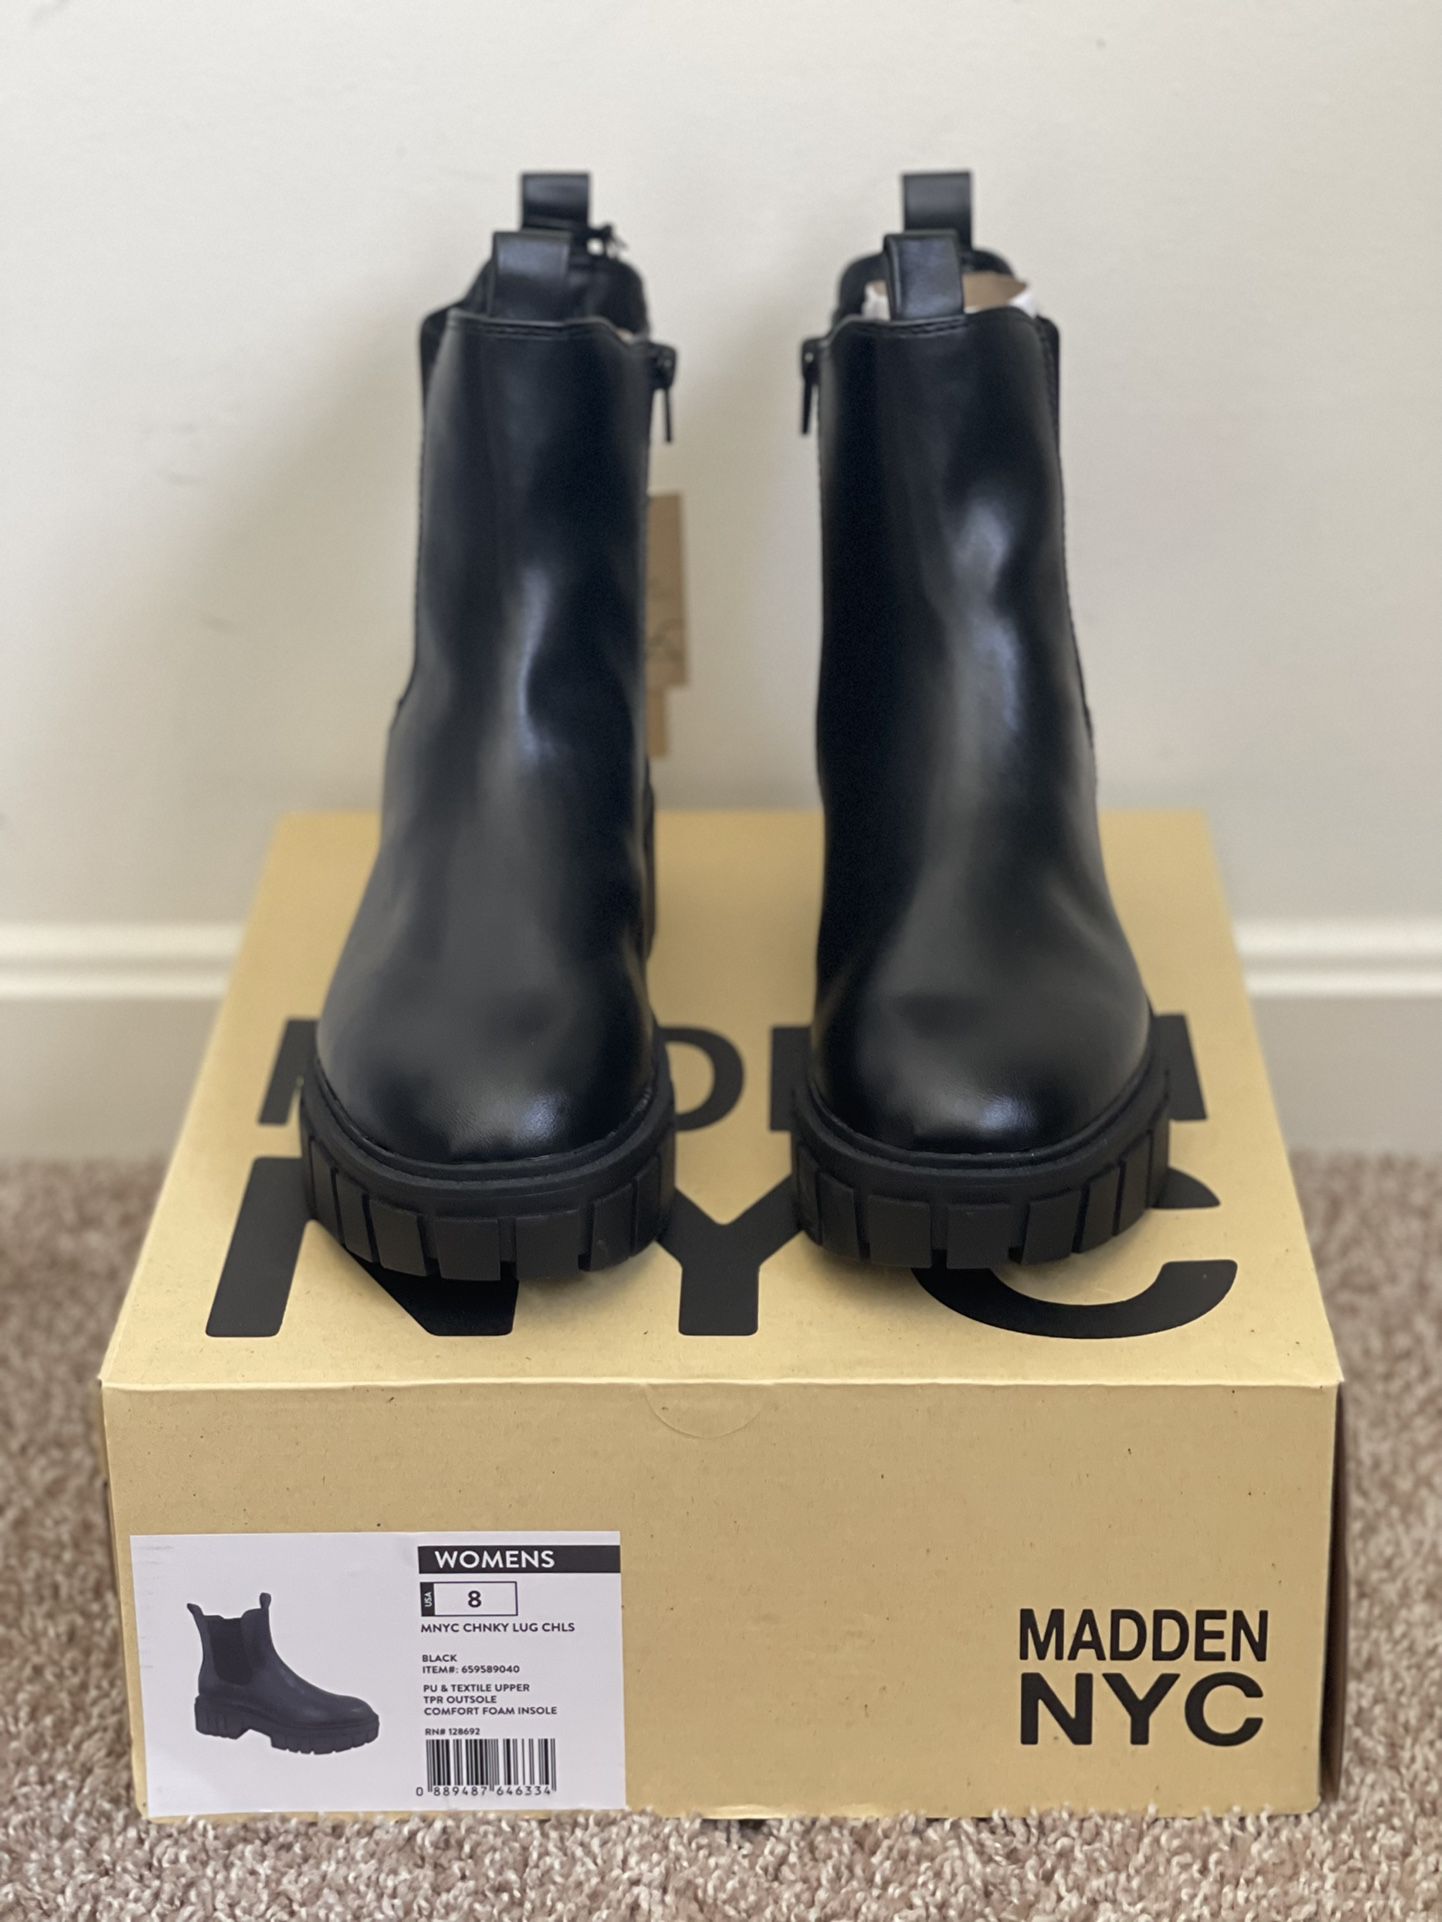 Madden NYC Women's Chunky Lug Chelsea Boots Black Size 8 New in BOX